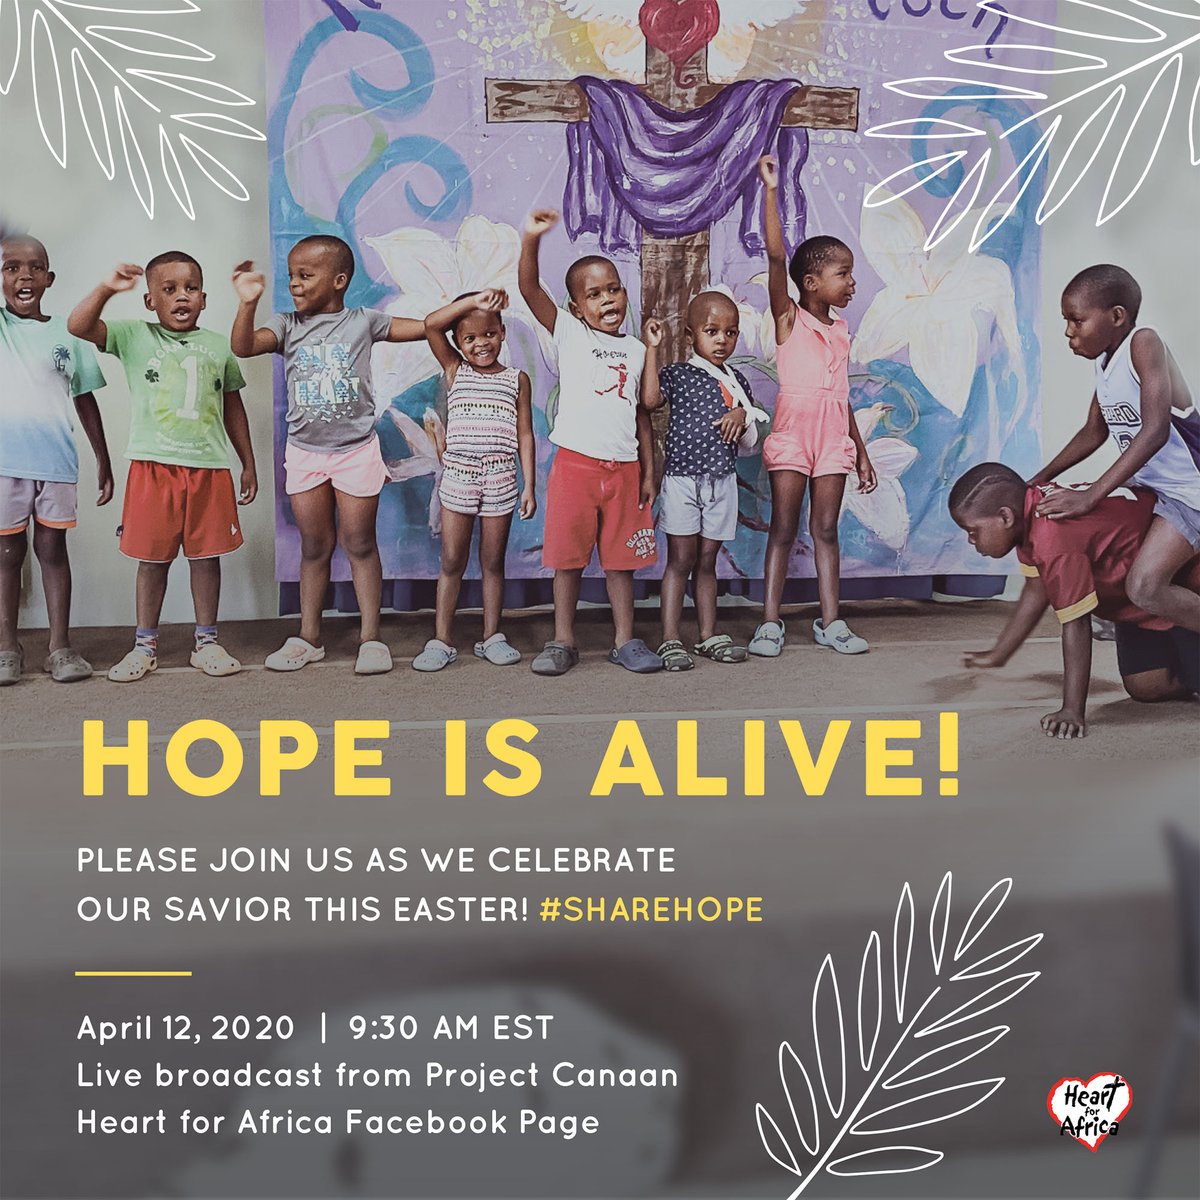 ✝️ HOPE IS ALIVE!! Join us as we celebrate Easter together on Project Canaan! This Sunday at 9:30AM EST join us for our very first Facebook LIVE Easter Service! #sharehope facebook.com/heartforafrica/